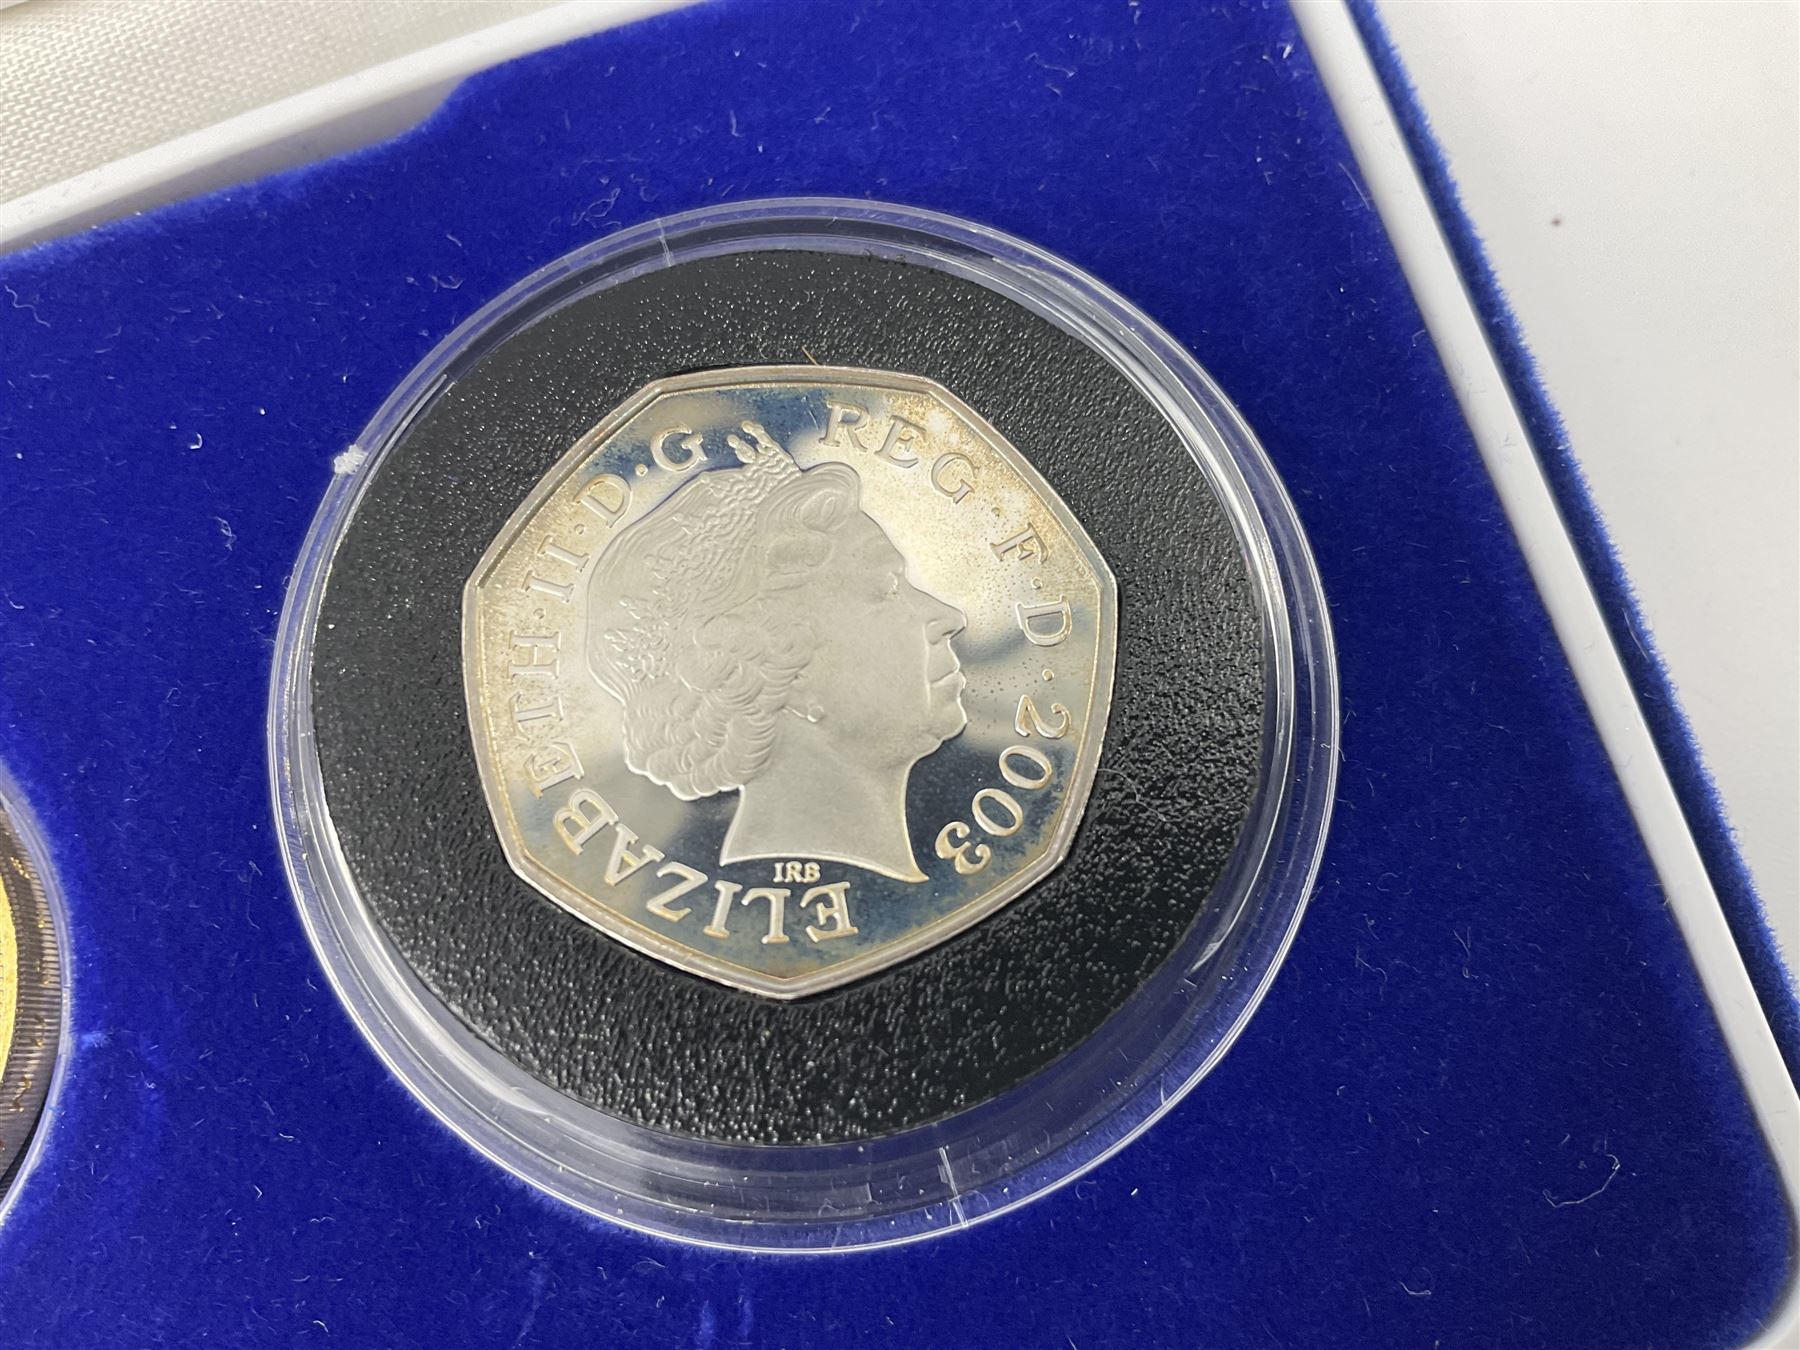 The Royal Mint United Kingdom 2003 silver proof piedfort three coin collection - Image 7 of 9